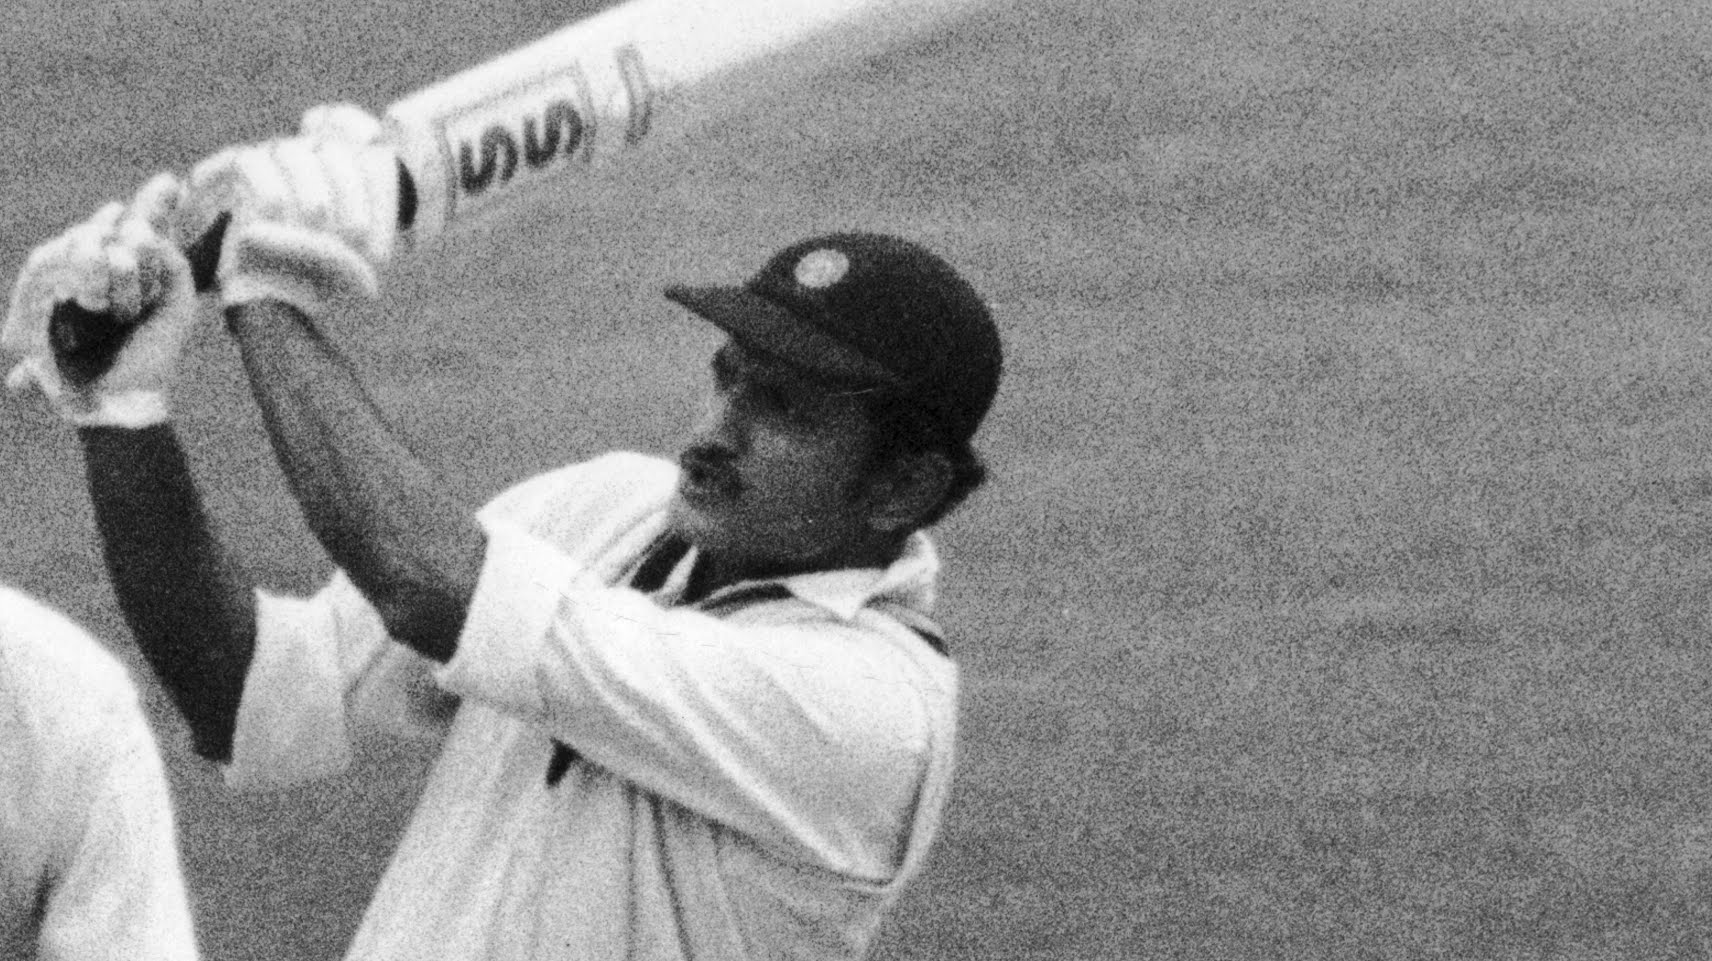 Former Indian cricket captain Ajit Wadekar passes away at the age of 77